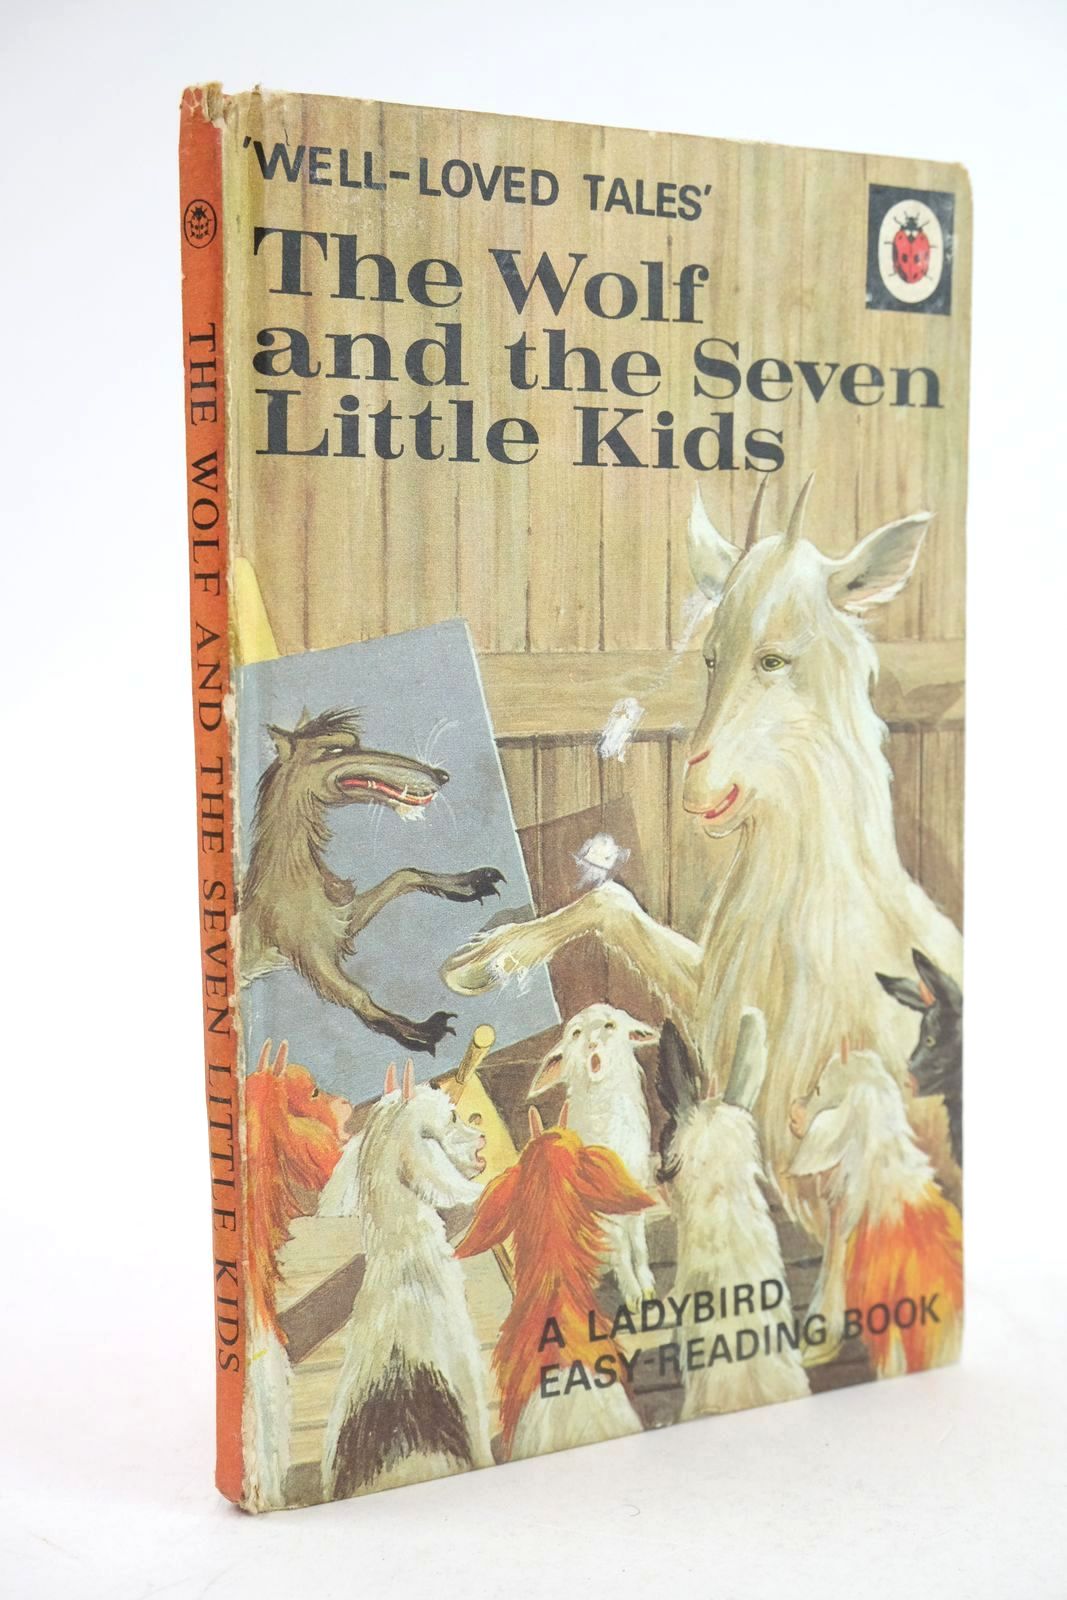 Photo of THE WOLF AND THE SEVEN LITTLE KIDS written by Southgate, Vera illustrated by Lumley, Robert published by Wills &amp; Hepworth Ltd. (STOCK CODE: 1325329)  for sale by Stella & Rose's Books